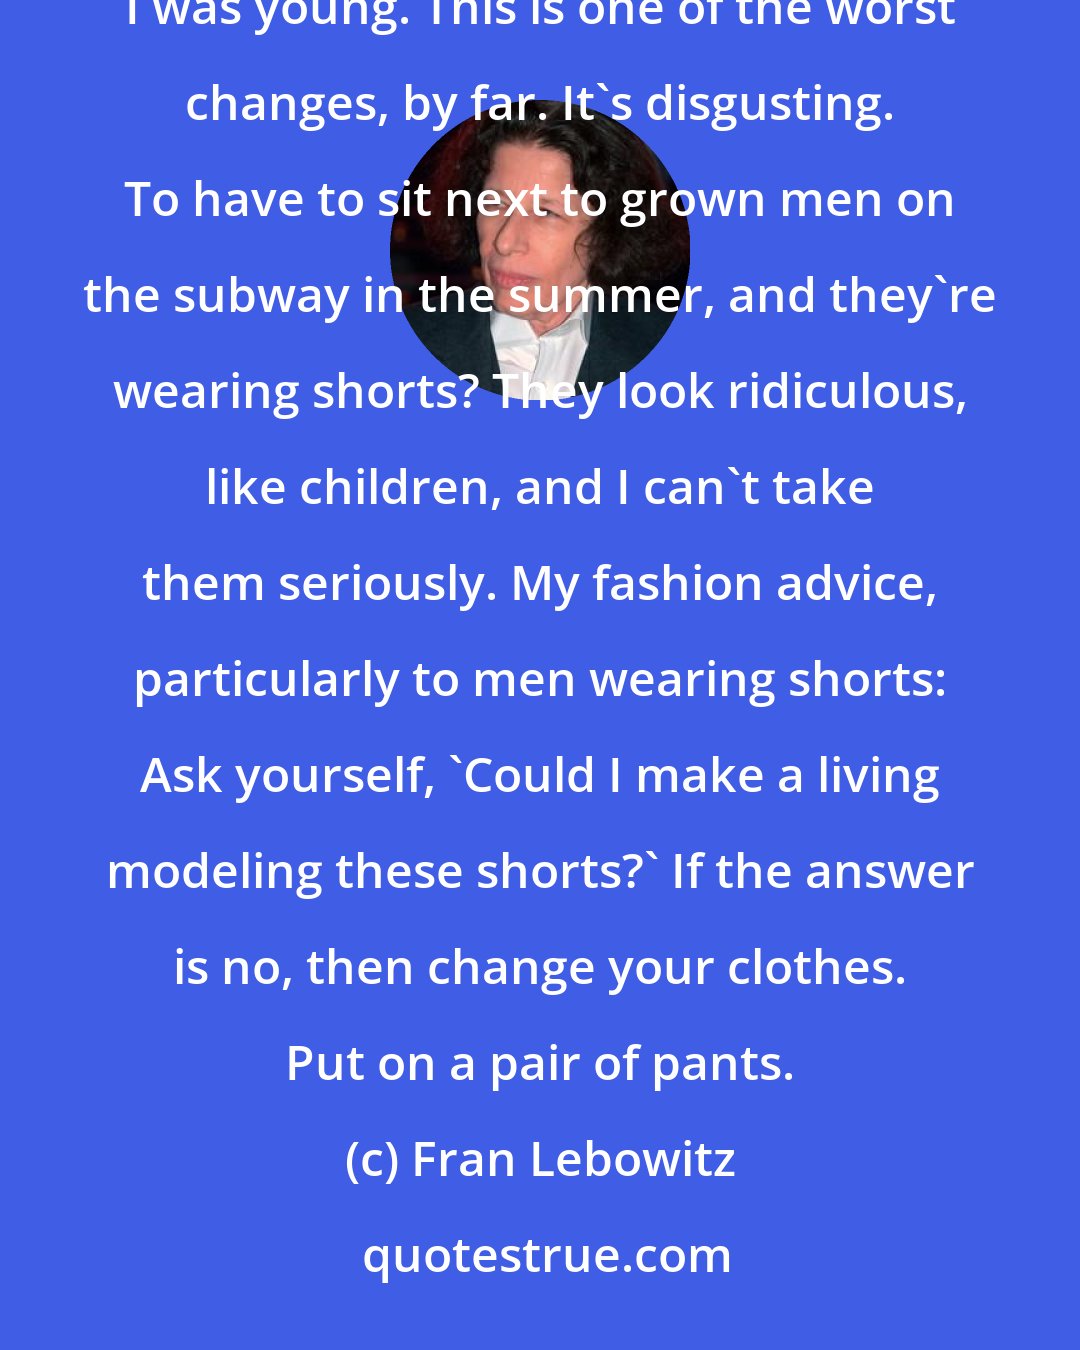 Fran Lebowitz: One of the biggest changes in my lifetime, is the phenomenon of men wearing shorts. Men never wore shorts when I was young. This is one of the worst changes, by far. It's disgusting. To have to sit next to grown men on the subway in the summer, and they're wearing shorts? They look ridiculous, like children, and I can't take them seriously. My fashion advice, particularly to men wearing shorts: Ask yourself, 'Could I make a living modeling these shorts?' If the answer is no, then change your clothes. Put on a pair of pants.